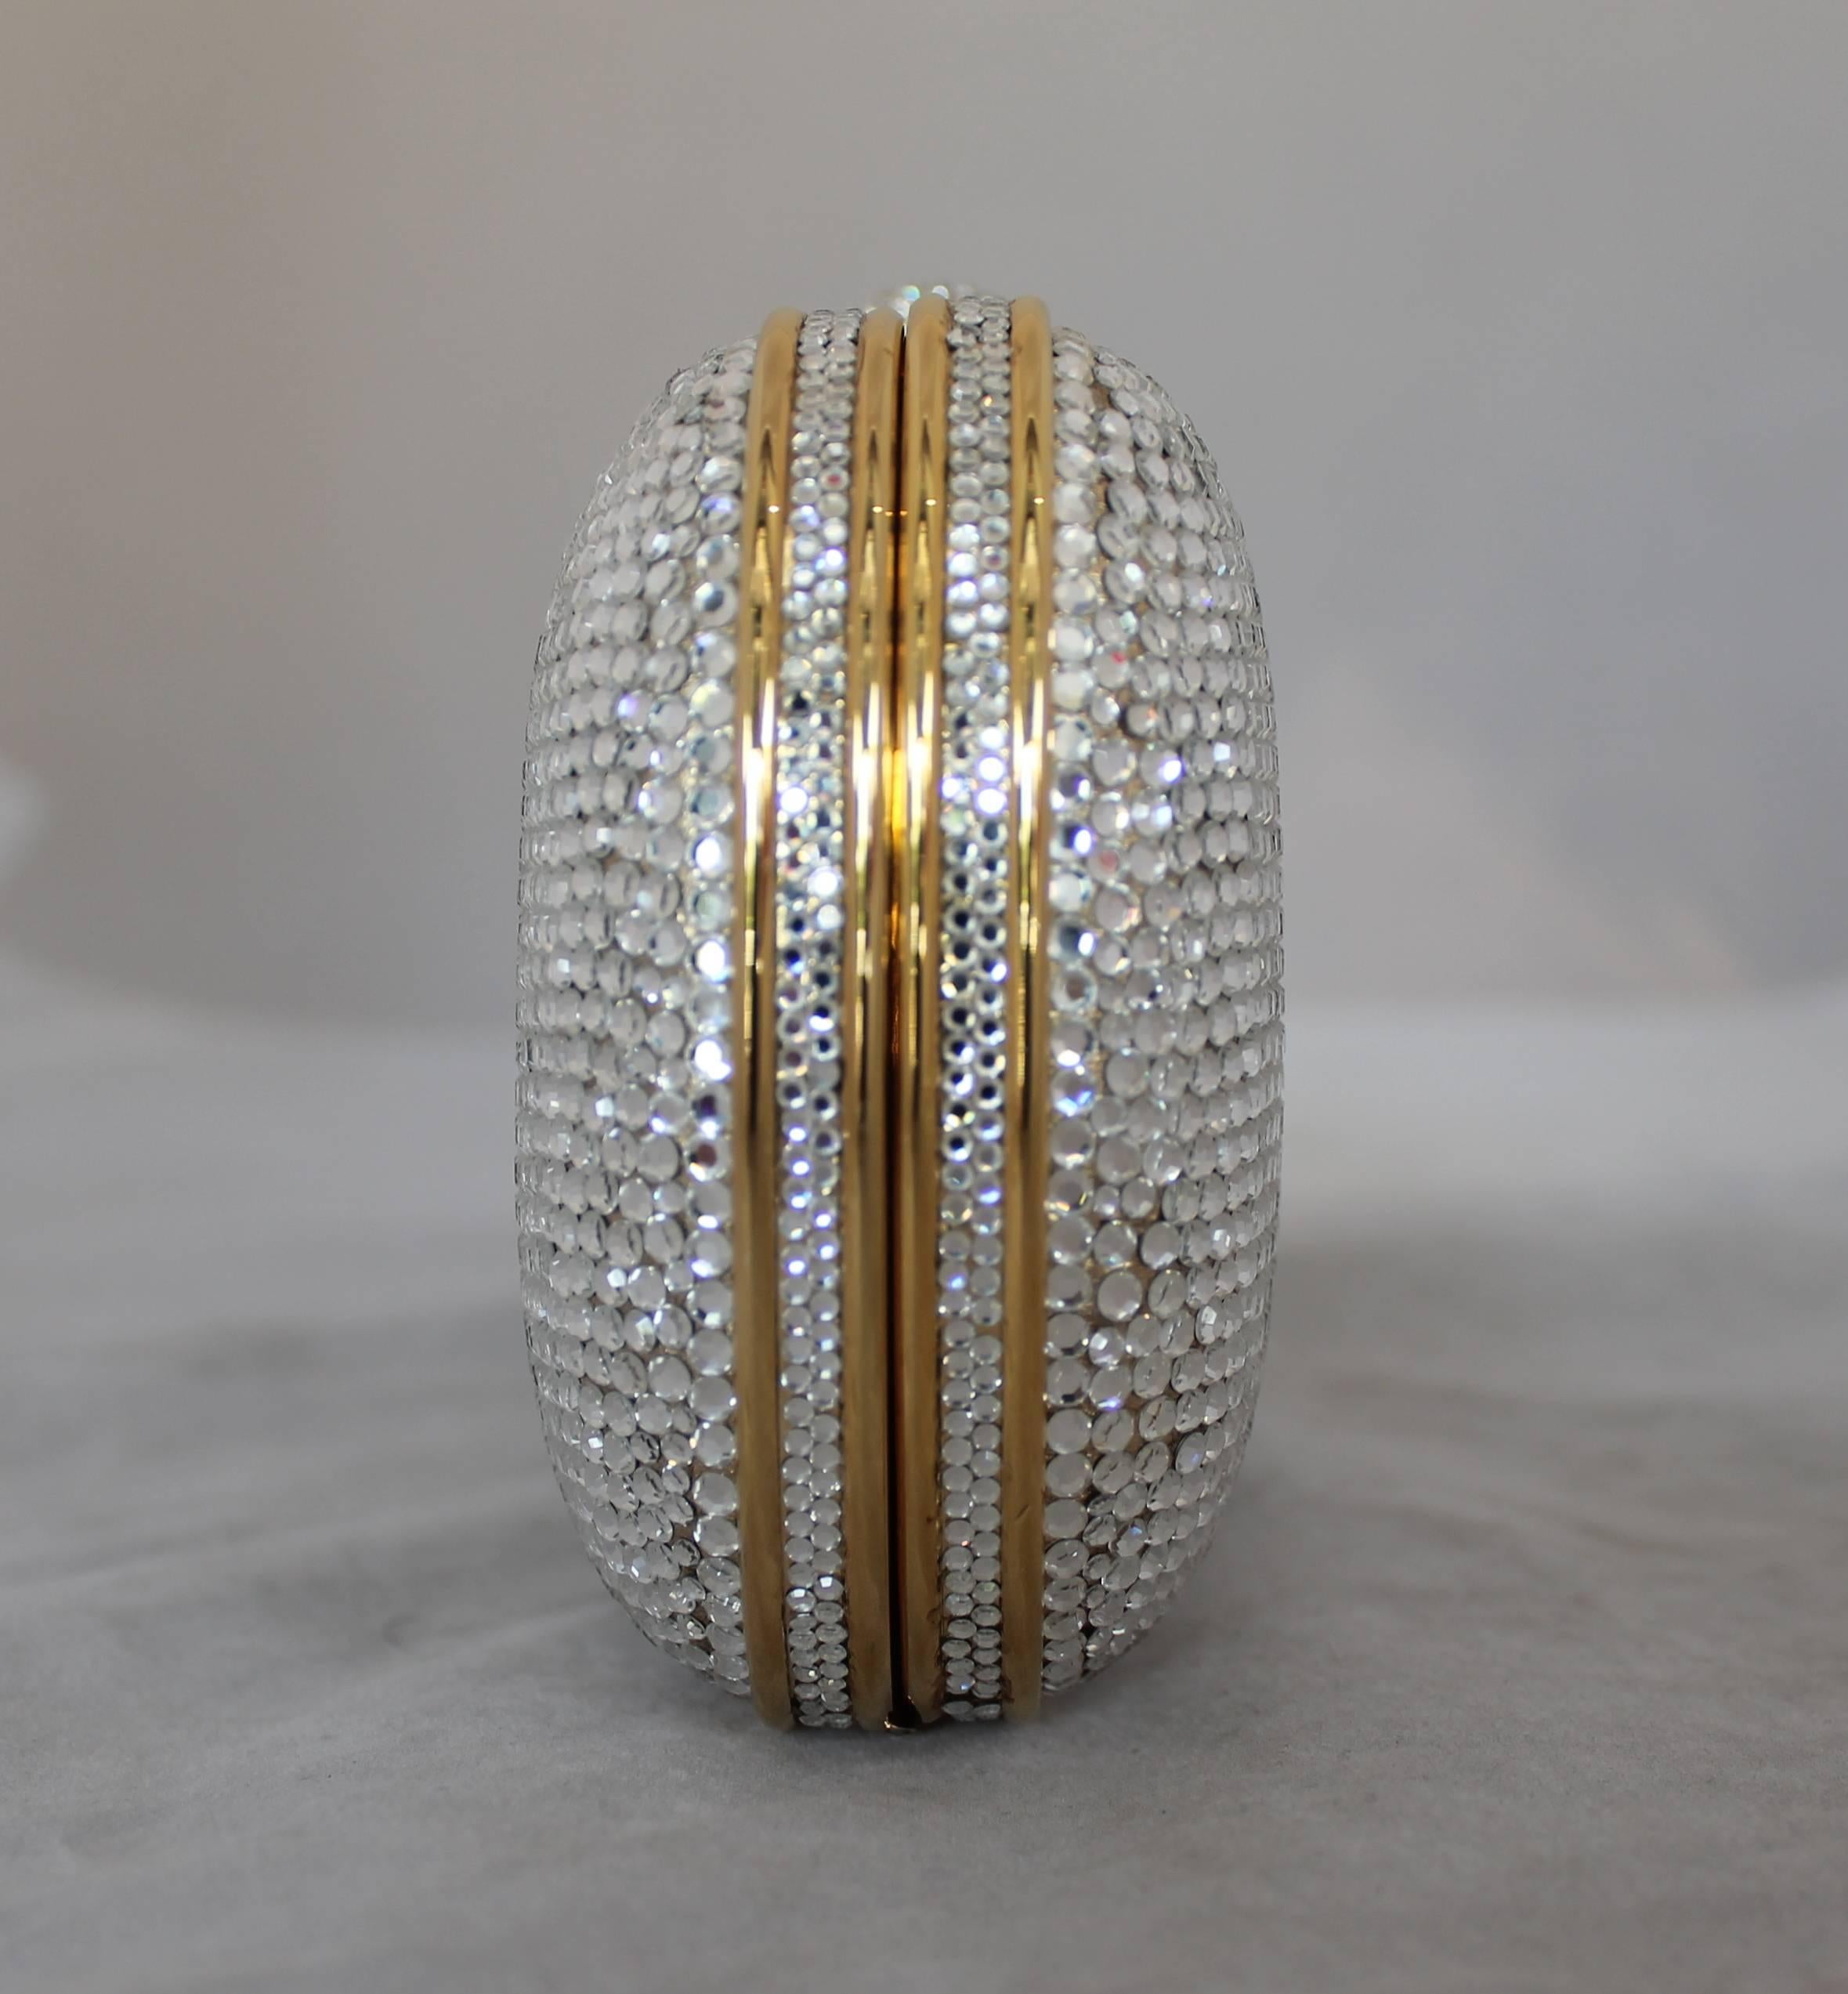 Judith Leiber Silver Rhinestone Minaudiere with Gold Strap. This bag is in excellent condition and comes with the duster, comb & mirror. It has a gold leather lining and it is a soft Leiber. It has a push clasp and can be used as a clutch or a